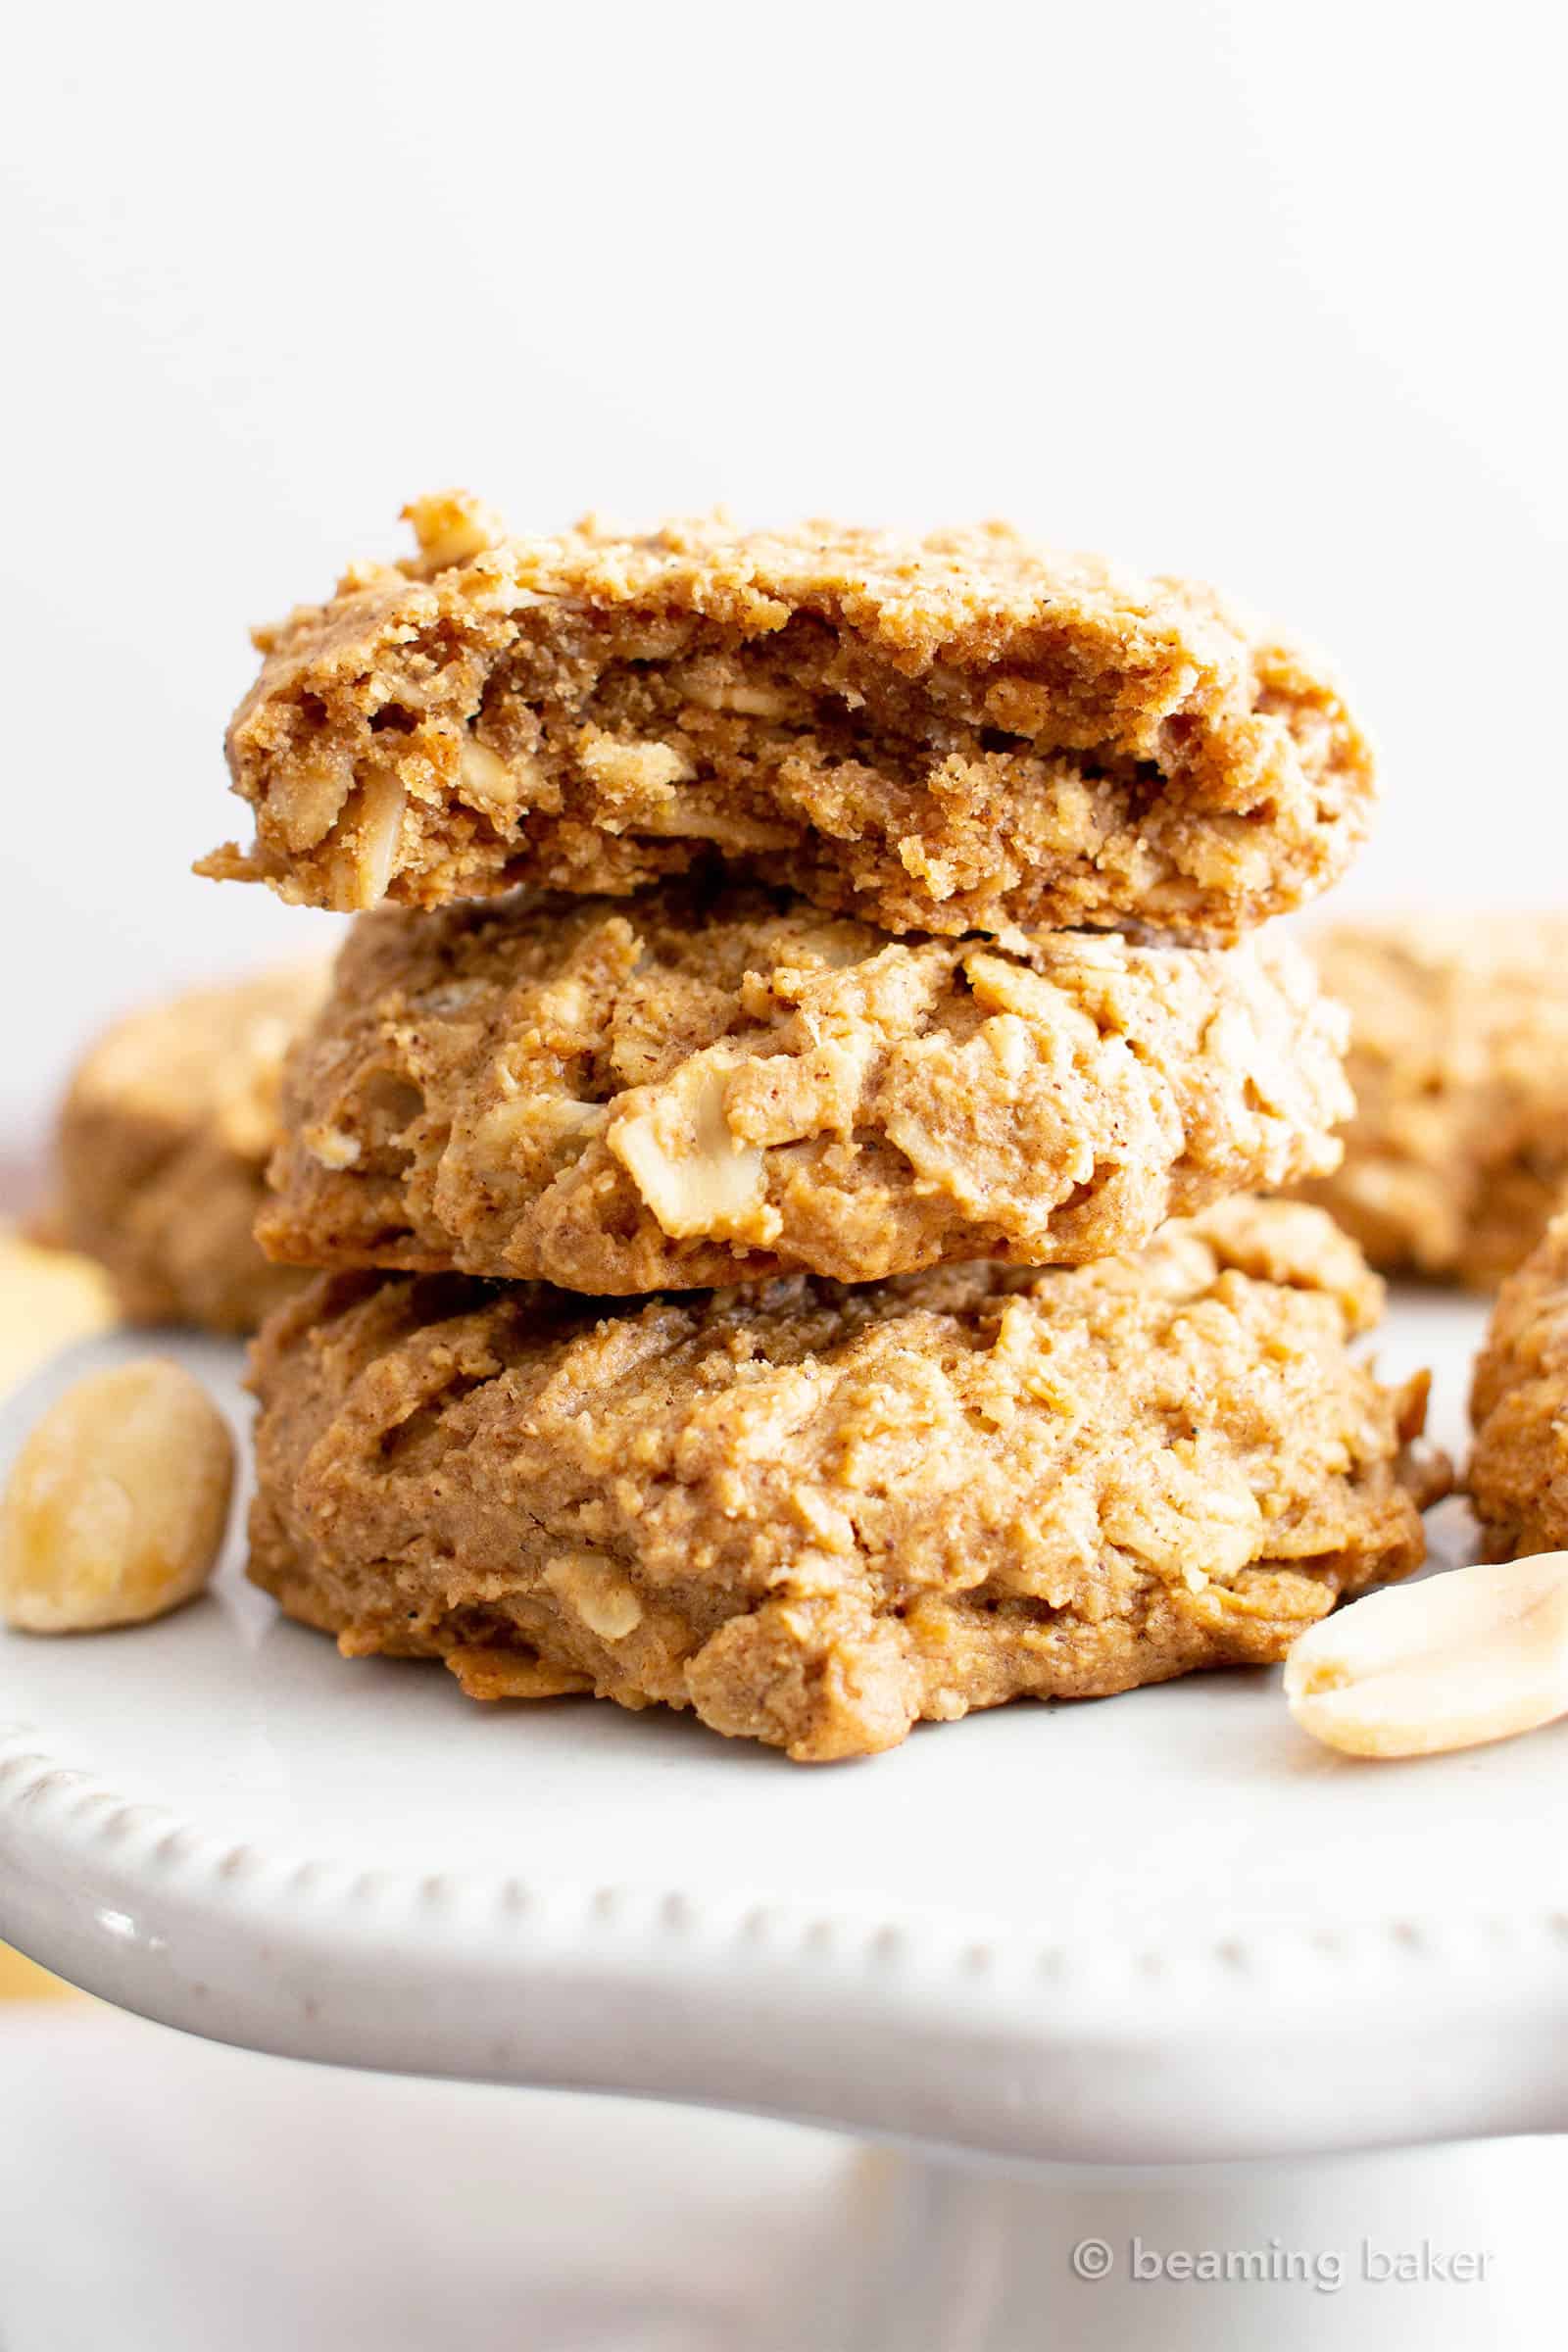 Oil-Free Peanut Butter Oatmeal Breakfast Cookies (V, GF): chewy ‘n healthy breakfast cookies bursting with peanut butter flavor and packed with nutritious ingredients! #Vegan #GlutenFree #BreakfastCookies #BeamingBaker #GlutenFreeVegan #OilFree #PeanutButter #Oatmeal #VeganCookies | Recipe at BeamingBaker.com